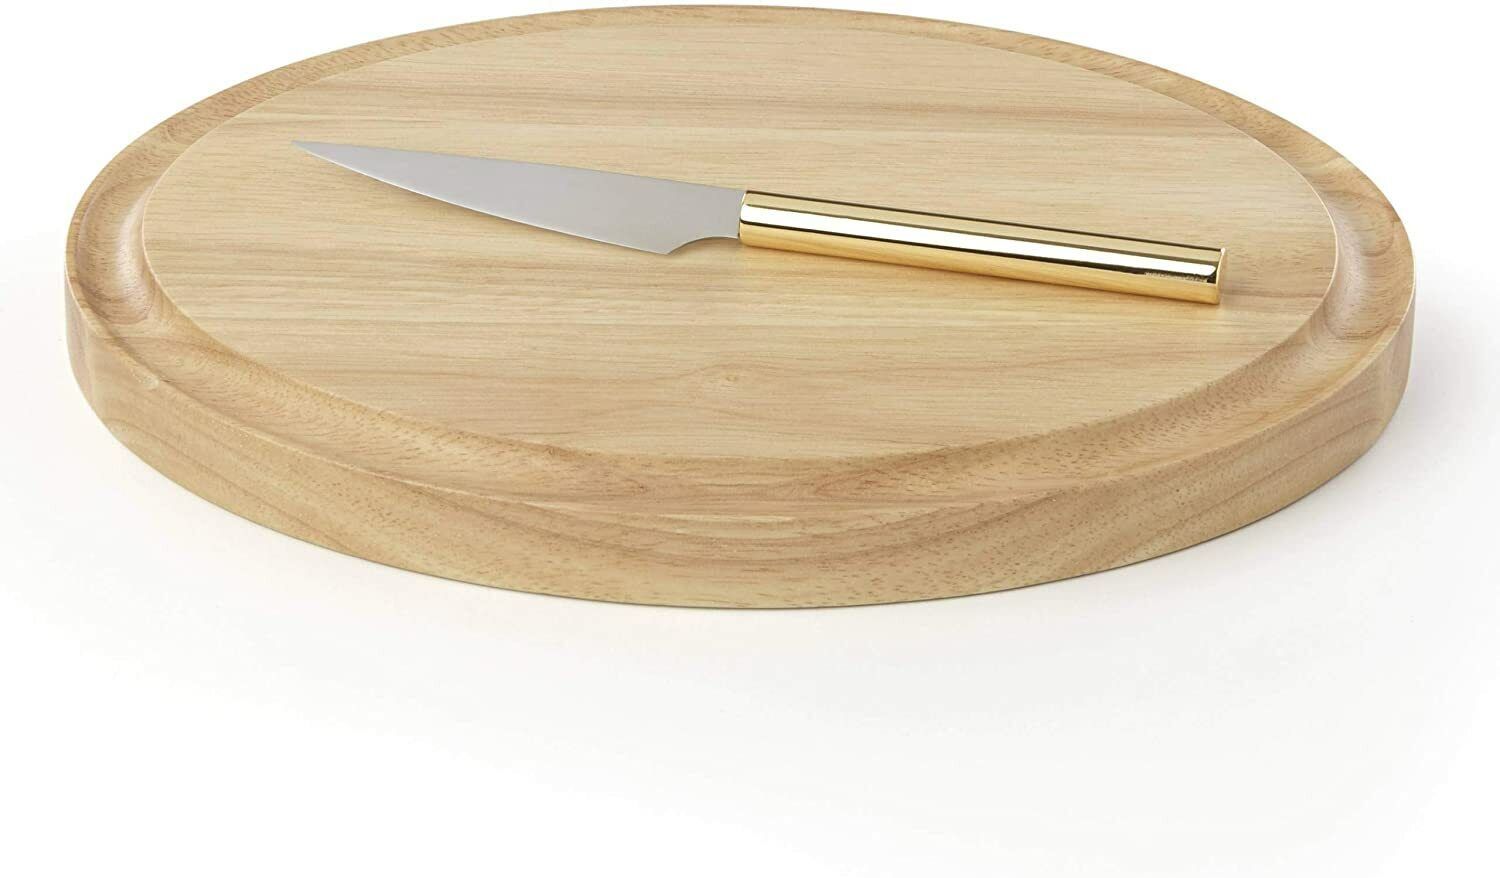 Primary image for Kate Spade Bar Cutting Board with Knife Round Beech Wood Melrose Avenue Gift NEW